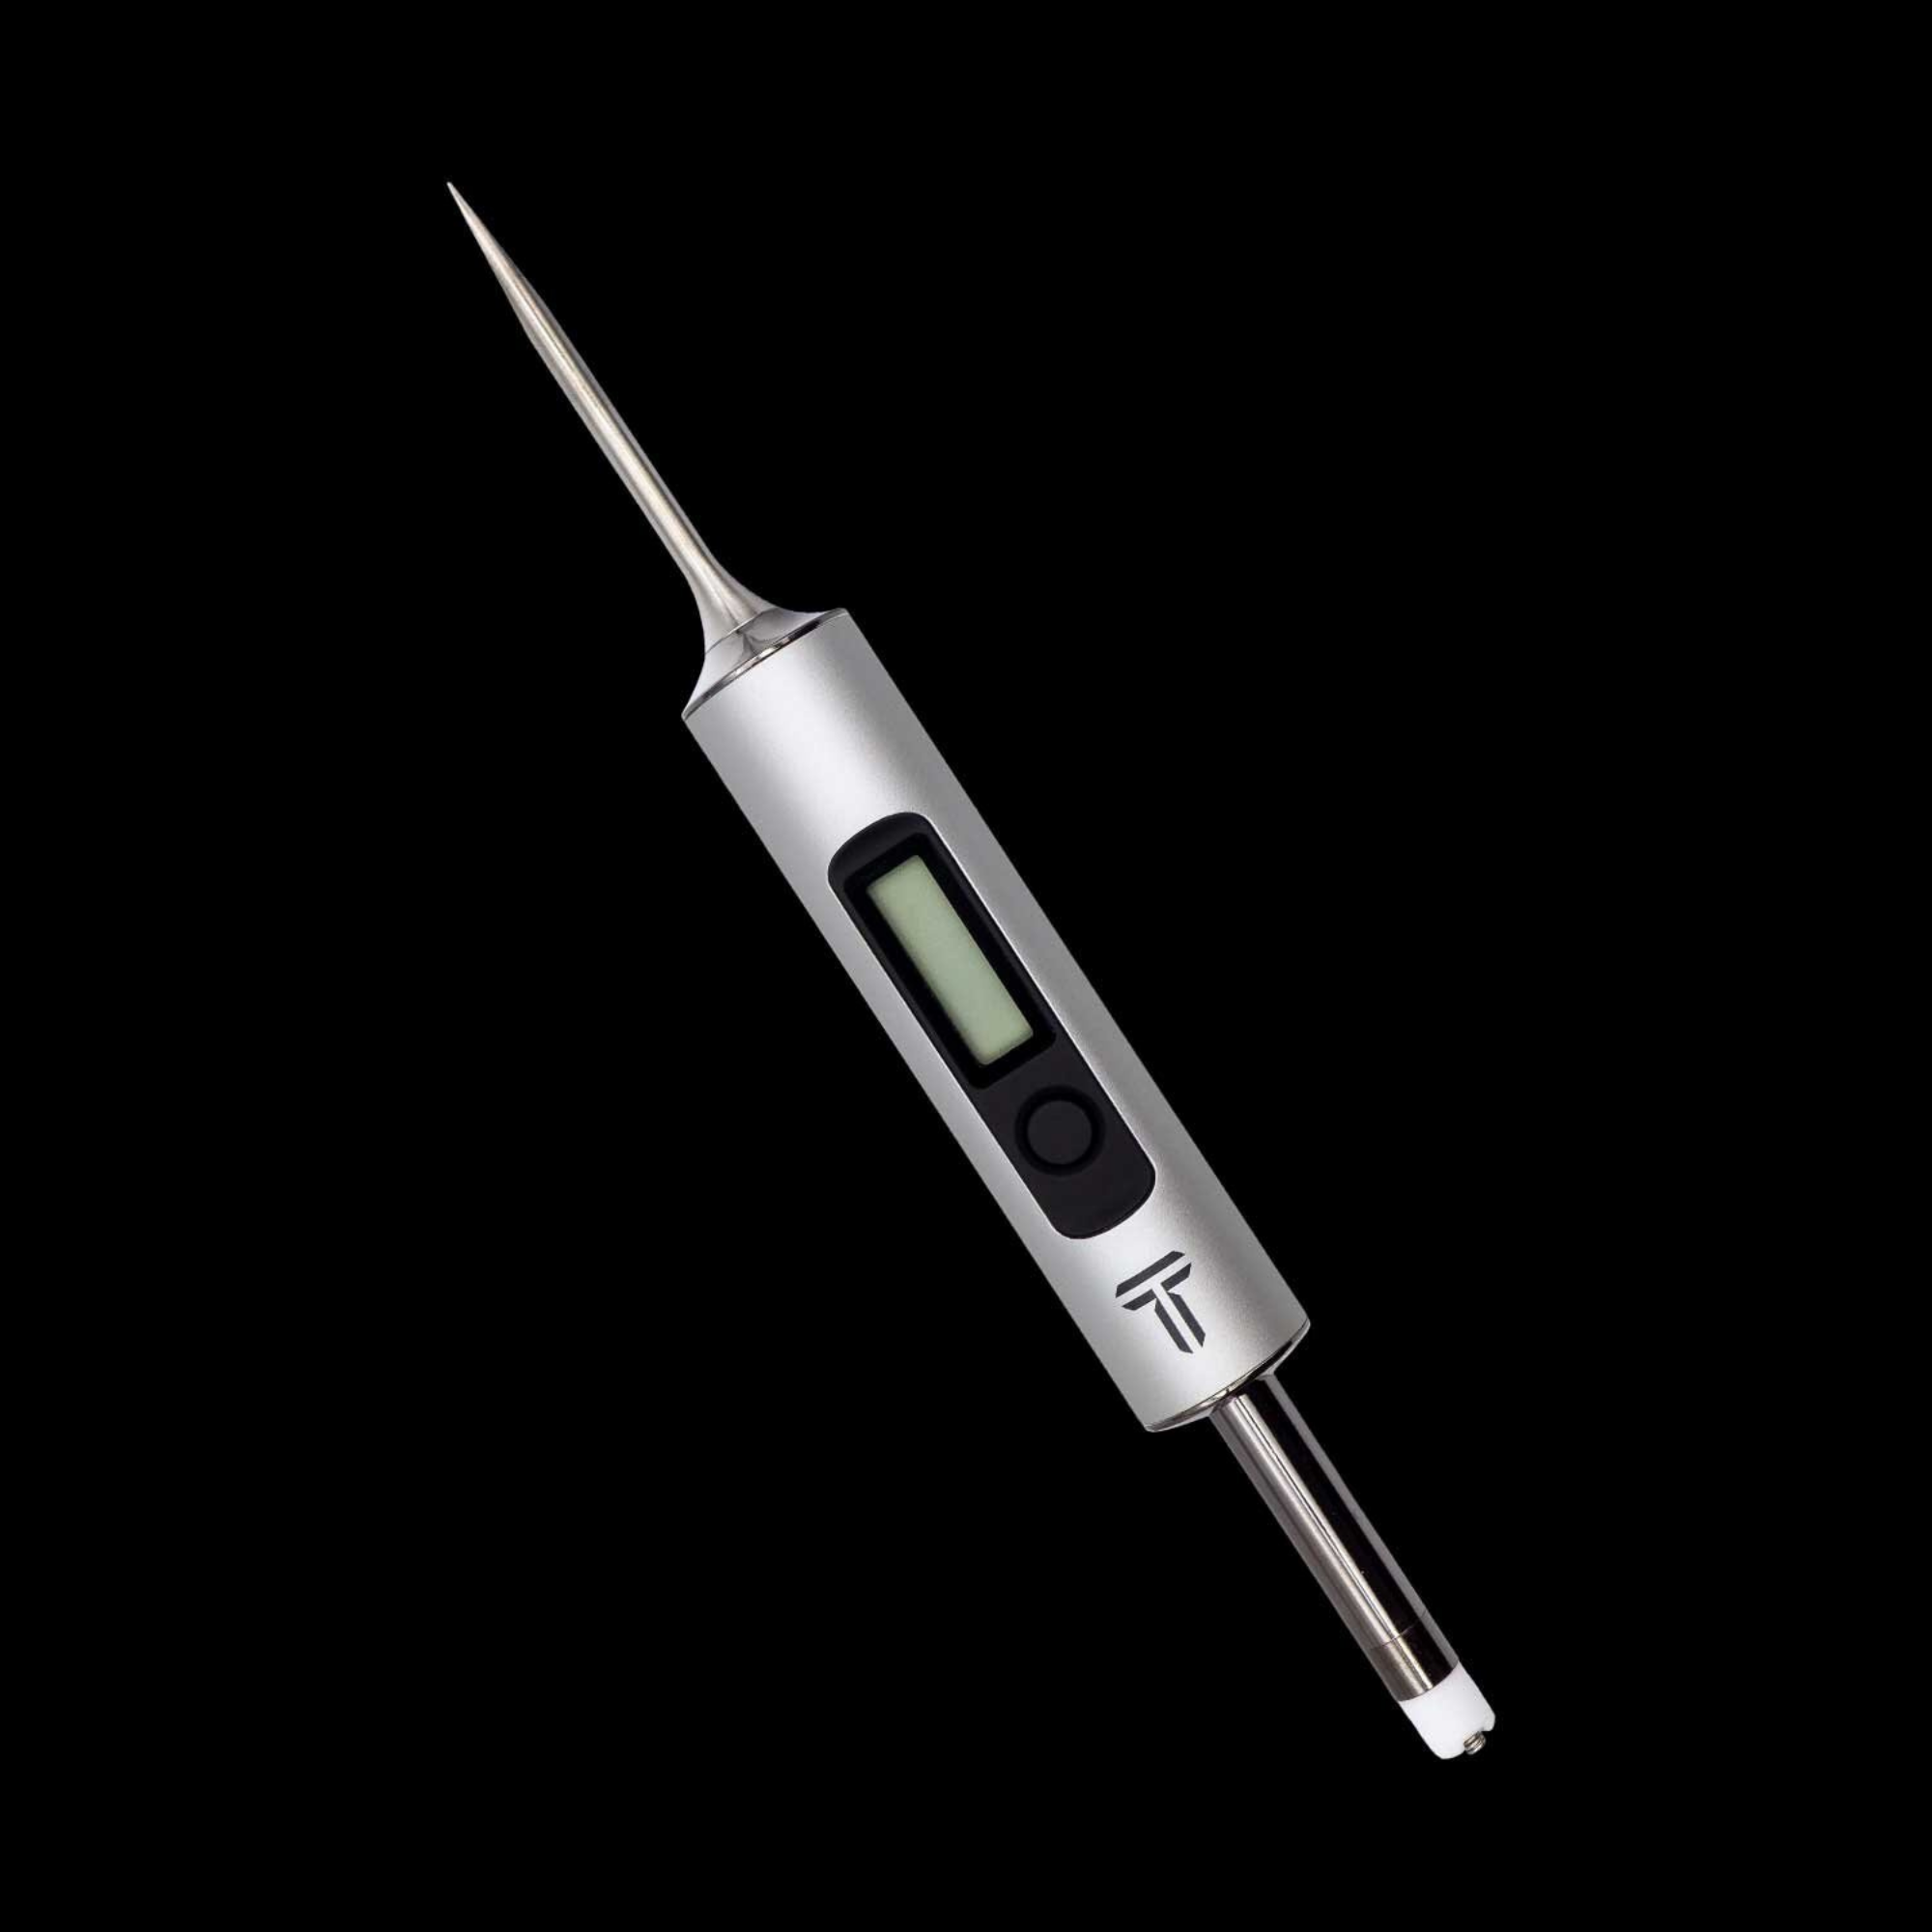 The Terpometer Digital 710 Thermometer and Dab Tool